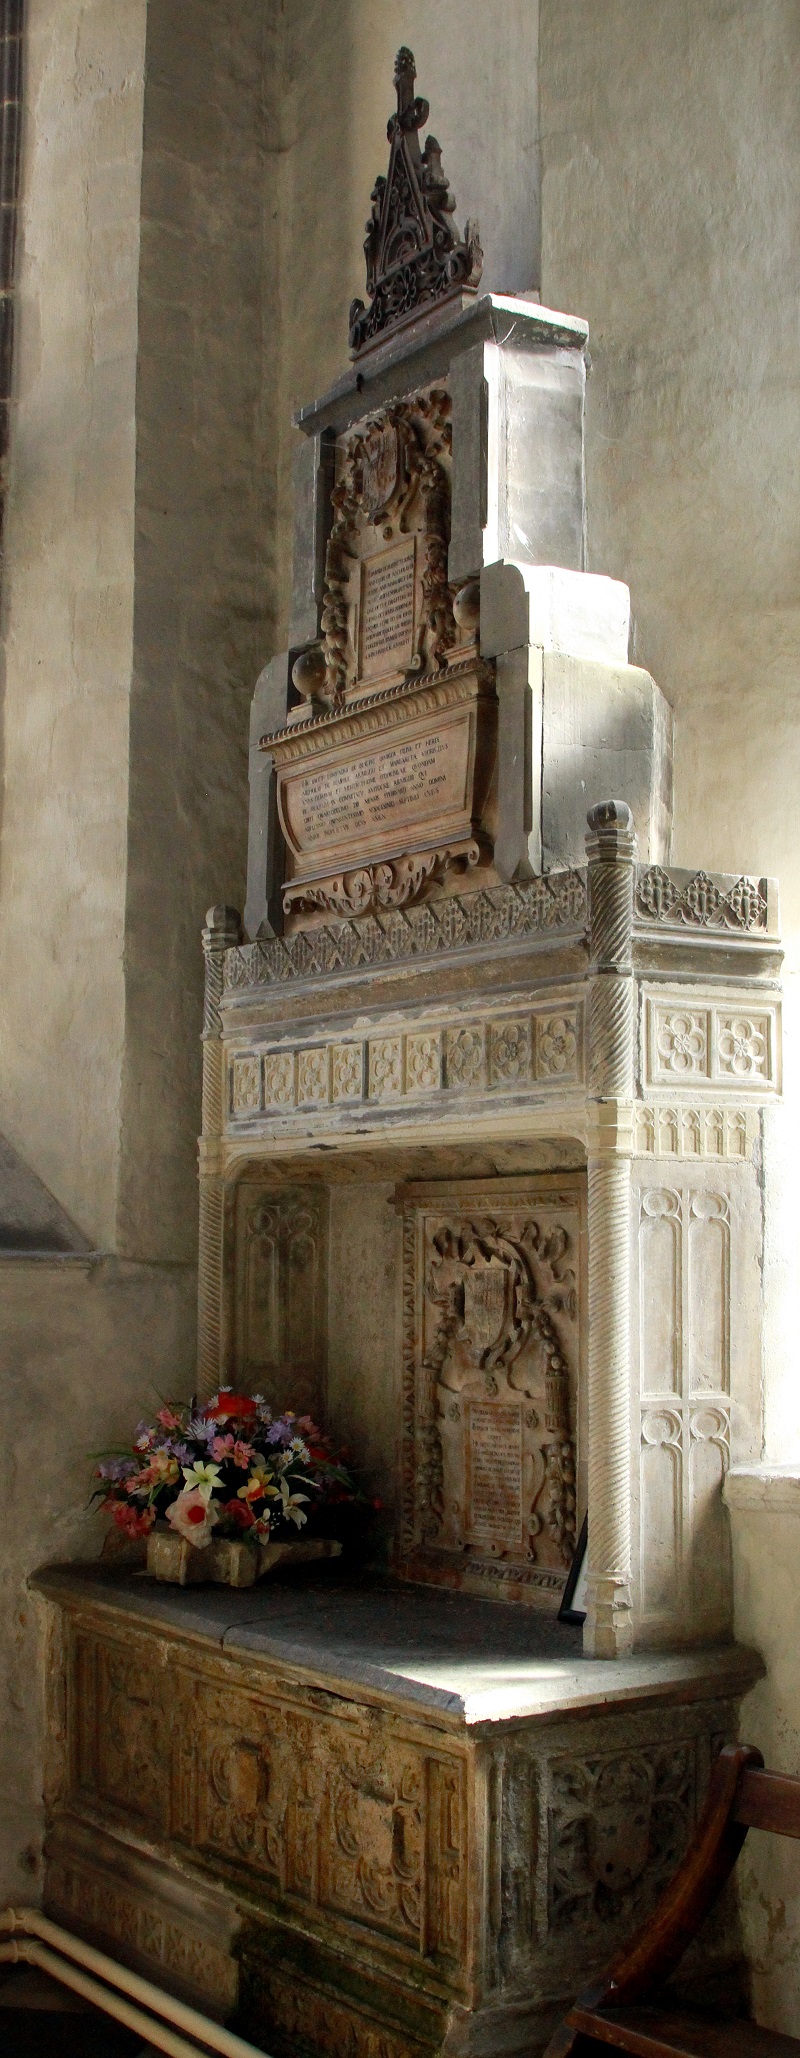 The tomb of Sir Nicholas Beaupre, his wife Margaret and their heirs 